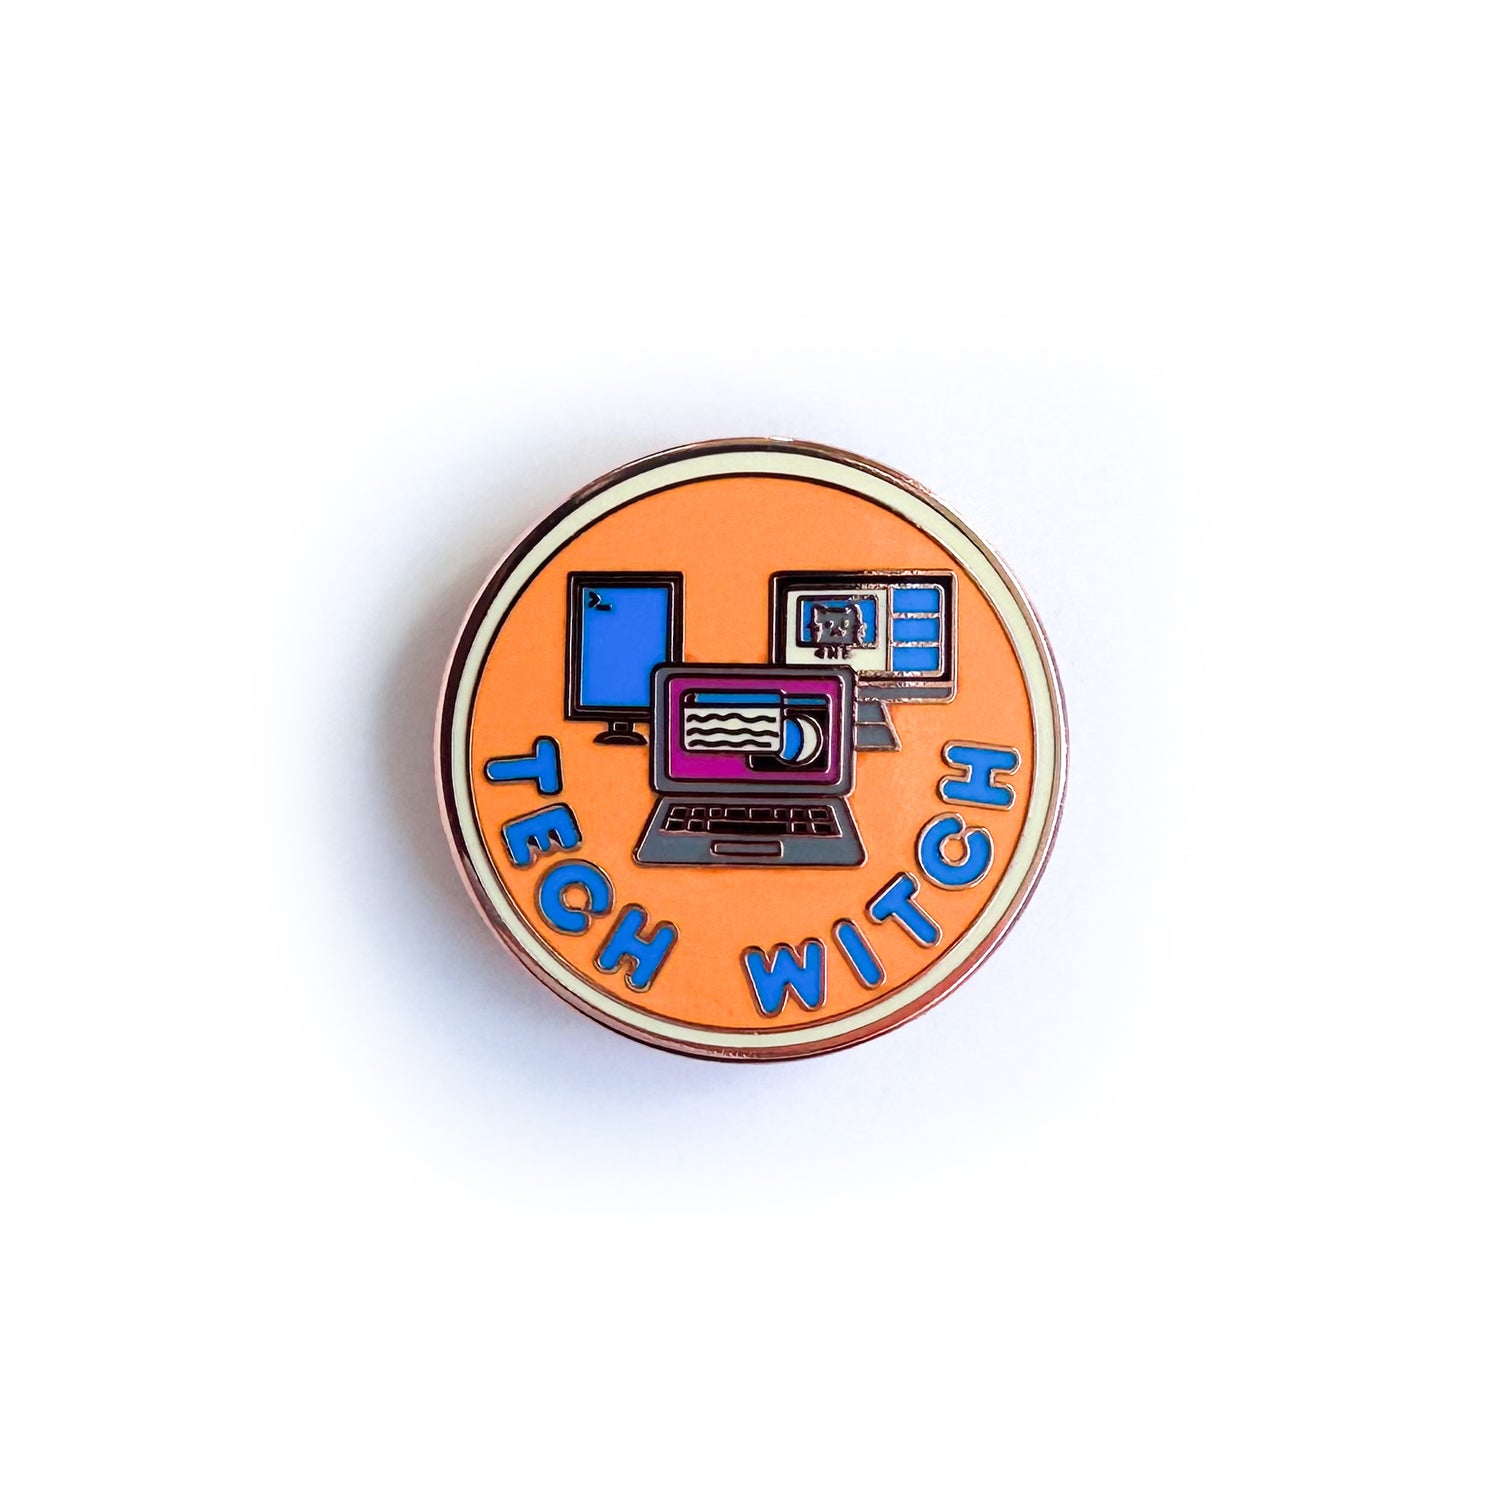 A circular merit badge style pin with the words "Tech Witch" on it. There are images of a laptop surrounded by two computer monitors on it. The pin is orange with a yellow border and blue words. 